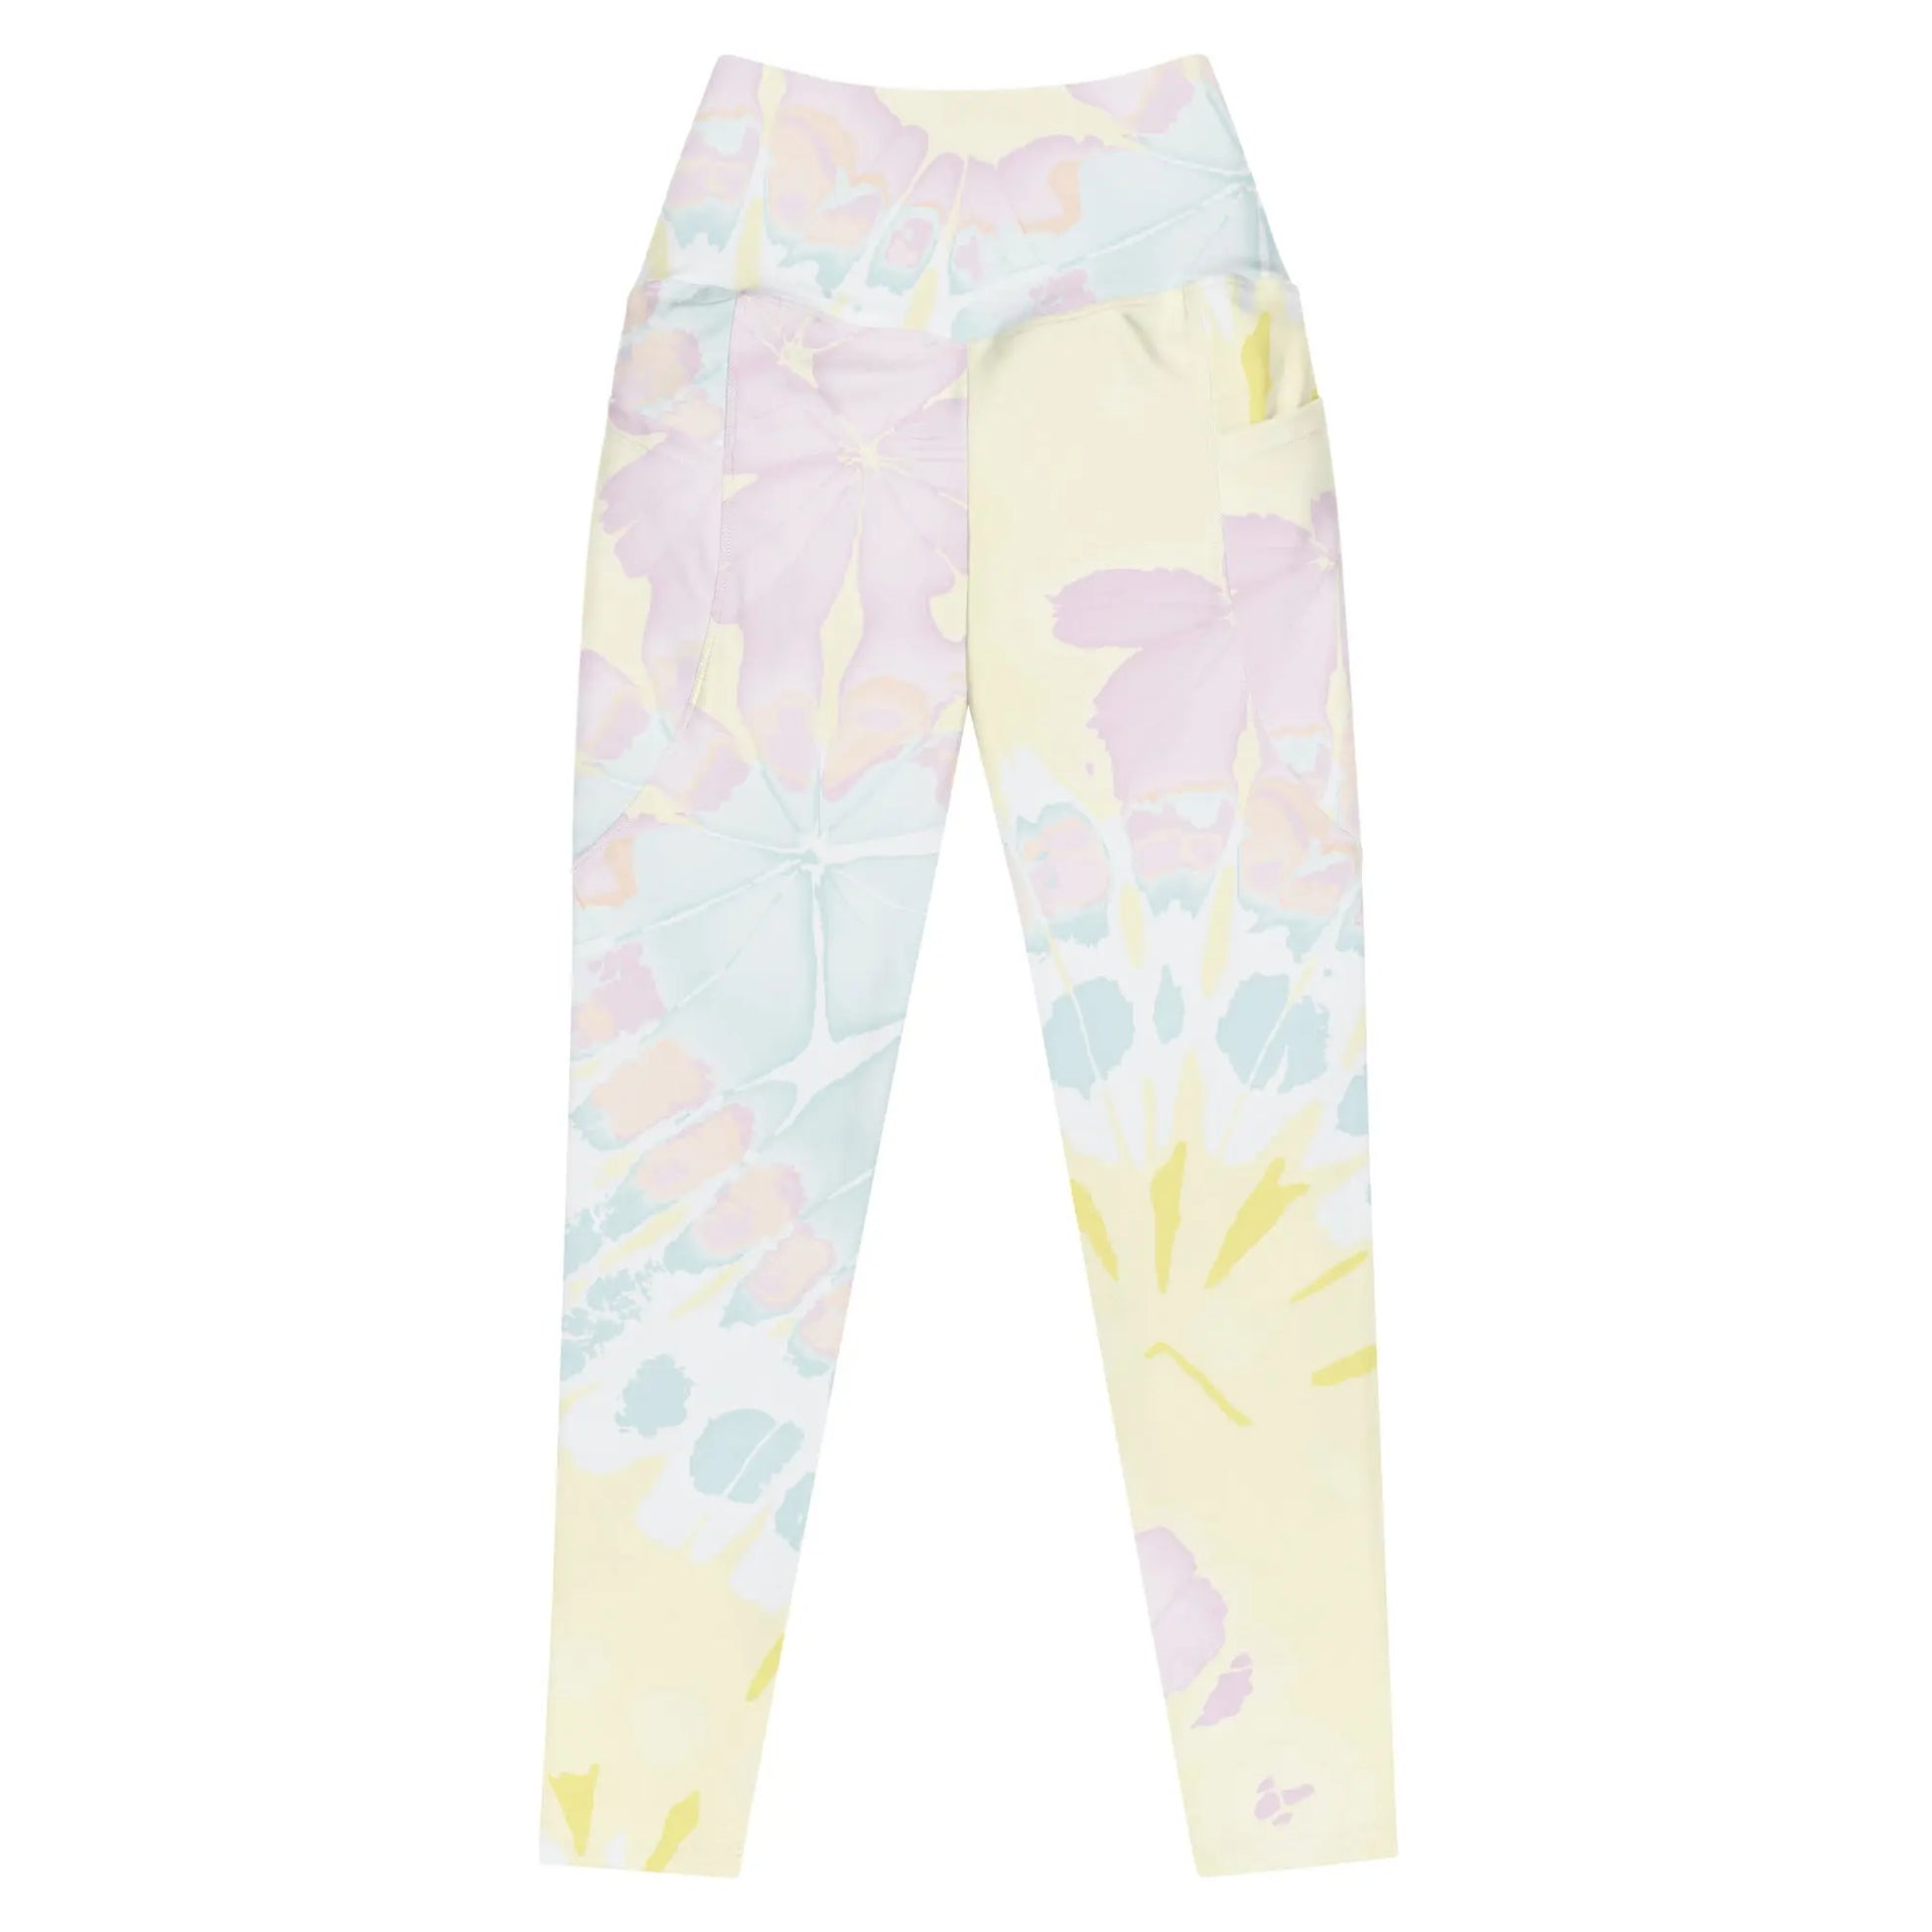 Sunny Recycled Leggings with Pockets Ellie Day Activewear